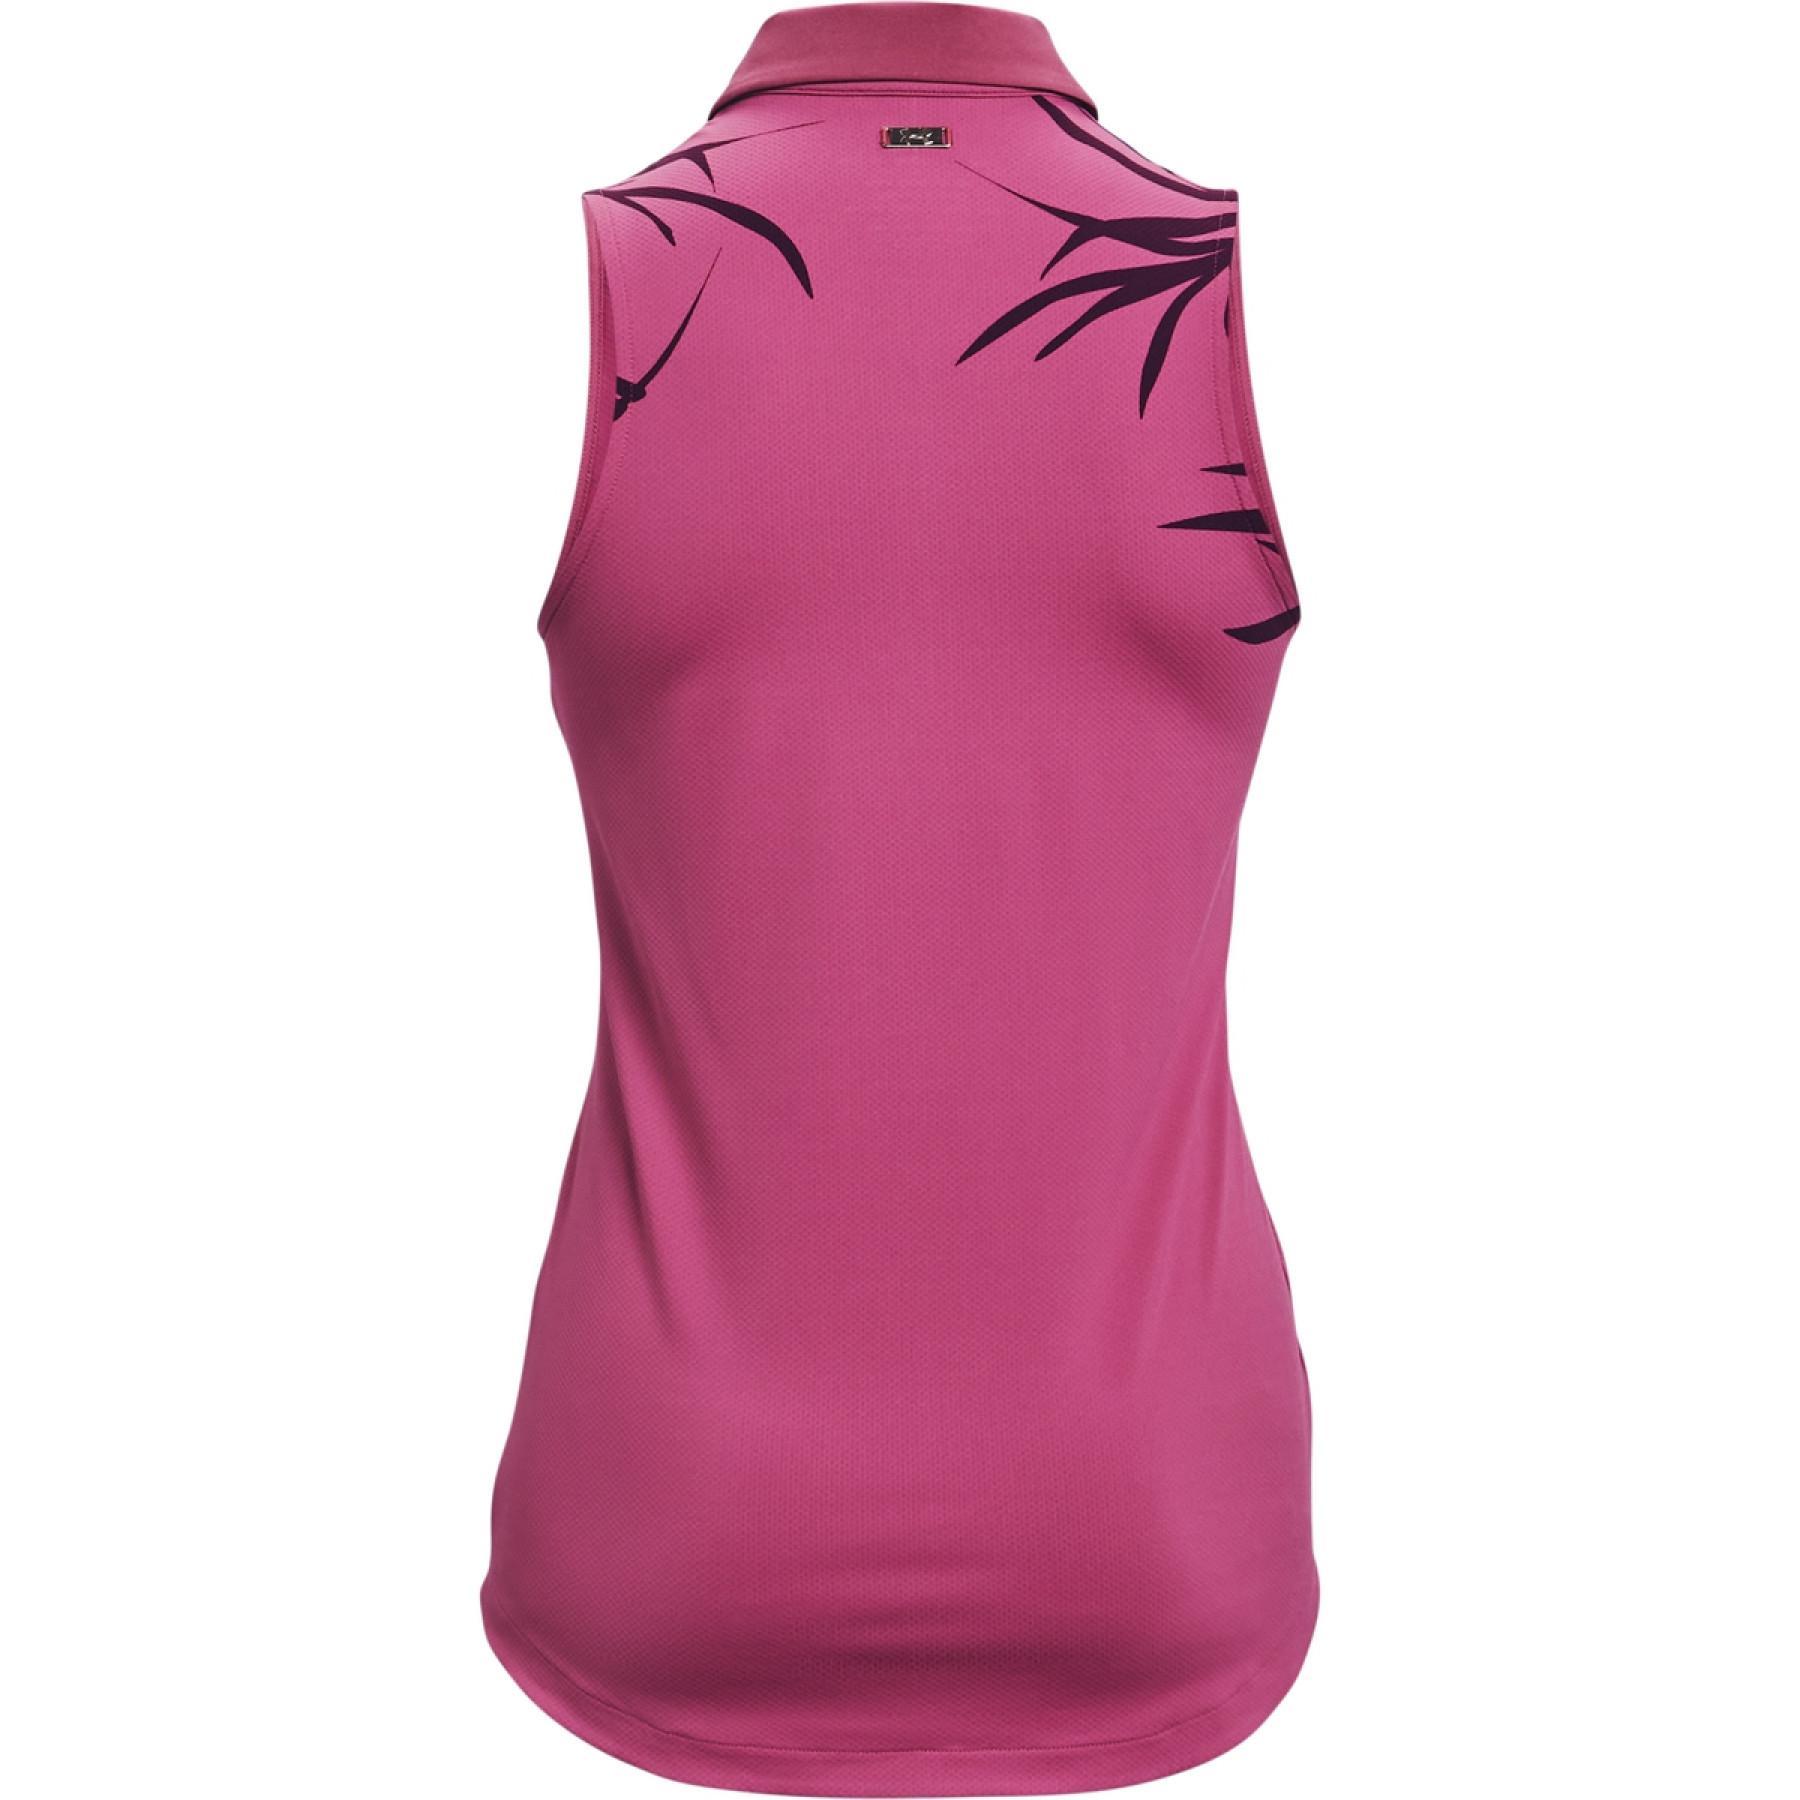 Polo femme Under Armour sans manches iso-chill